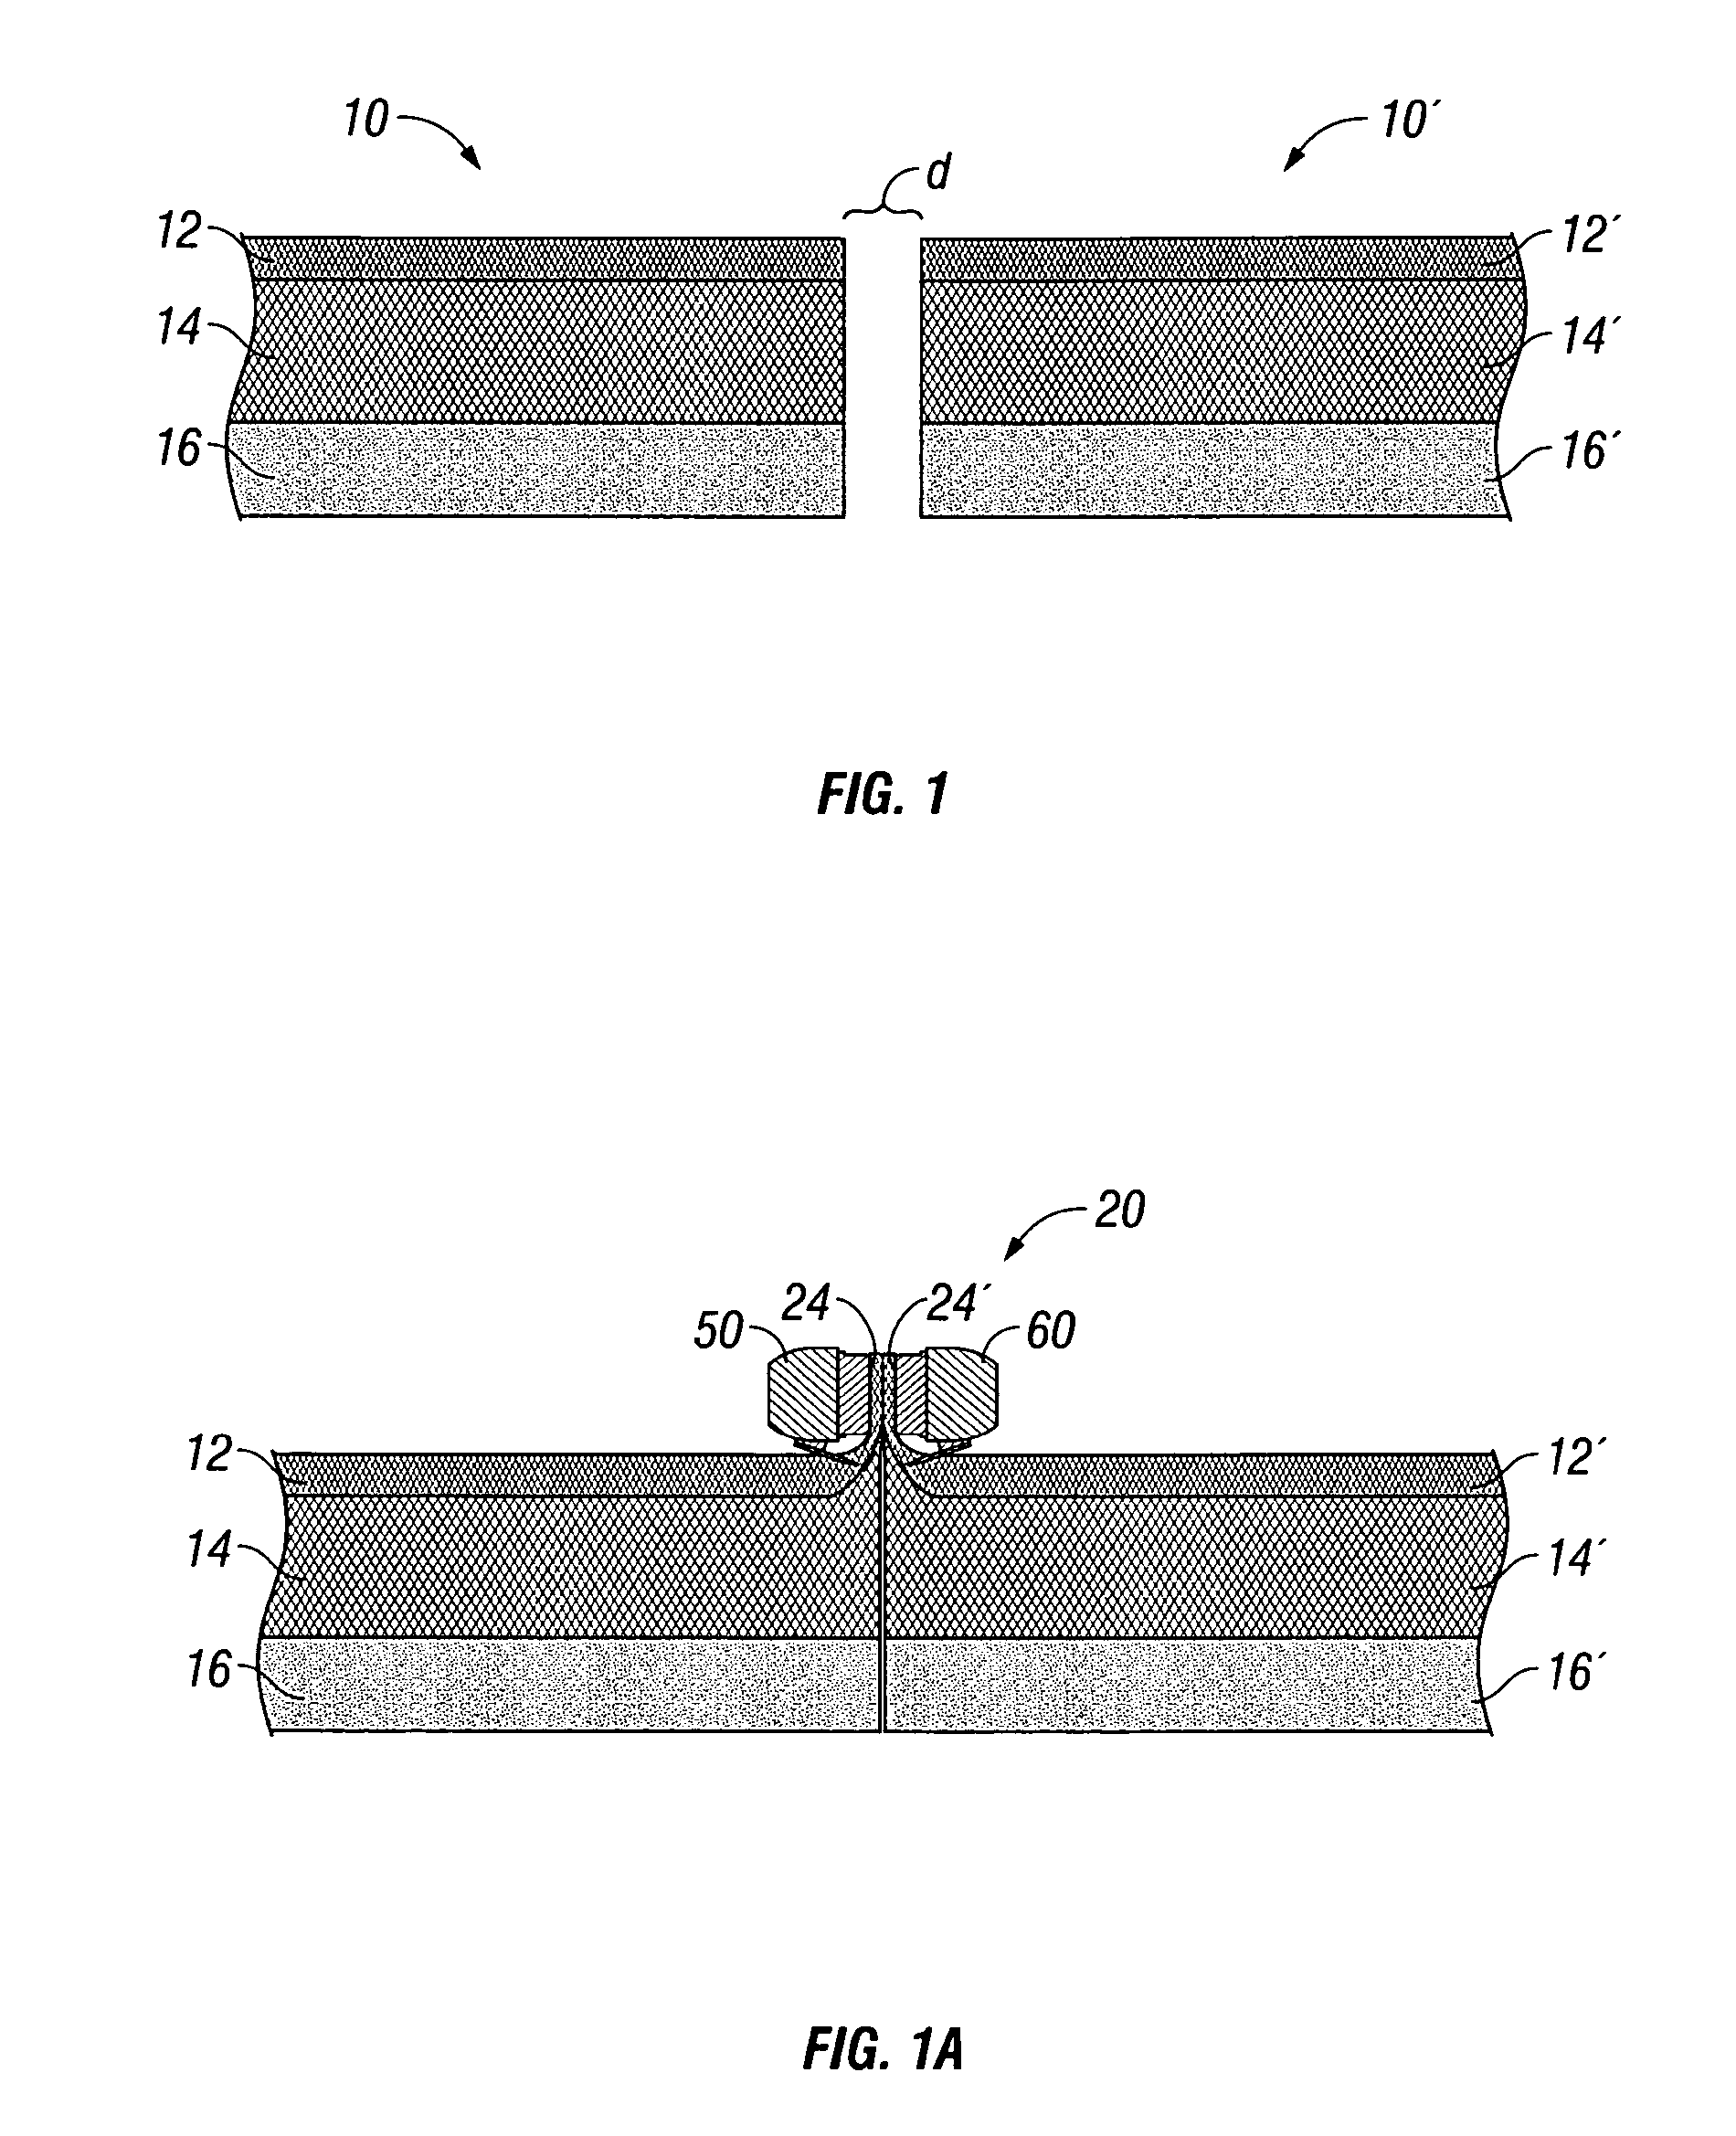 Bipolar electrosurgical sealing instrument having an improved tissue gripping device